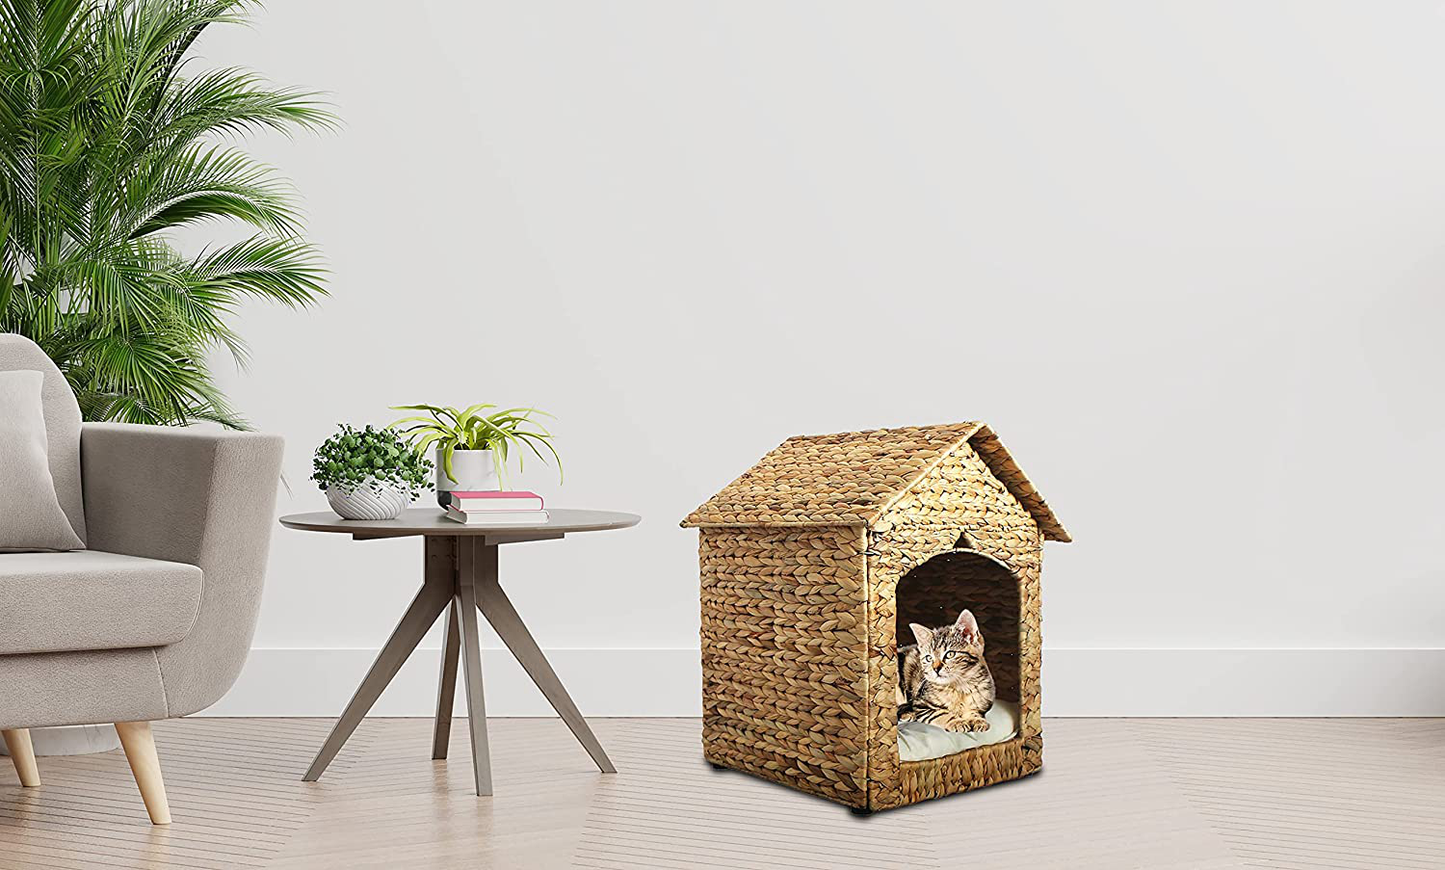 B.U.STYLE Ecofriendly Pet House Indoor, Foldable Puppy Bed, Cat Dog Housewater Hyacinth House for Indoor Used, and Natural Soft Cushion, Natural Color, 16.1Inl X 15.7W X 18.9Hin